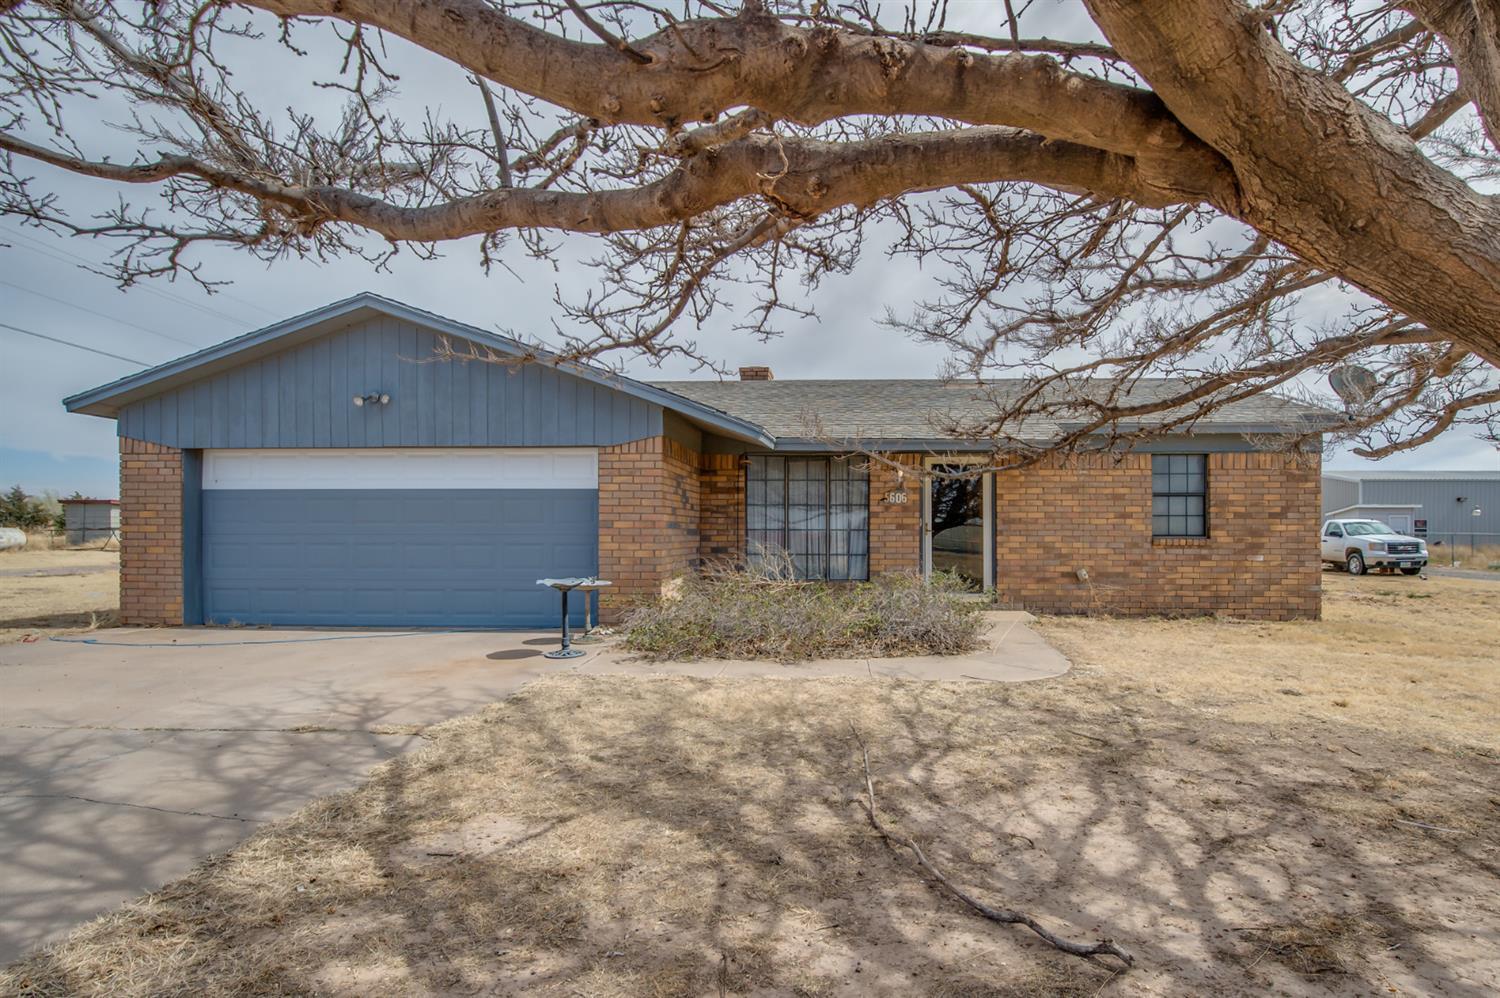 Houses for sale in lubbock